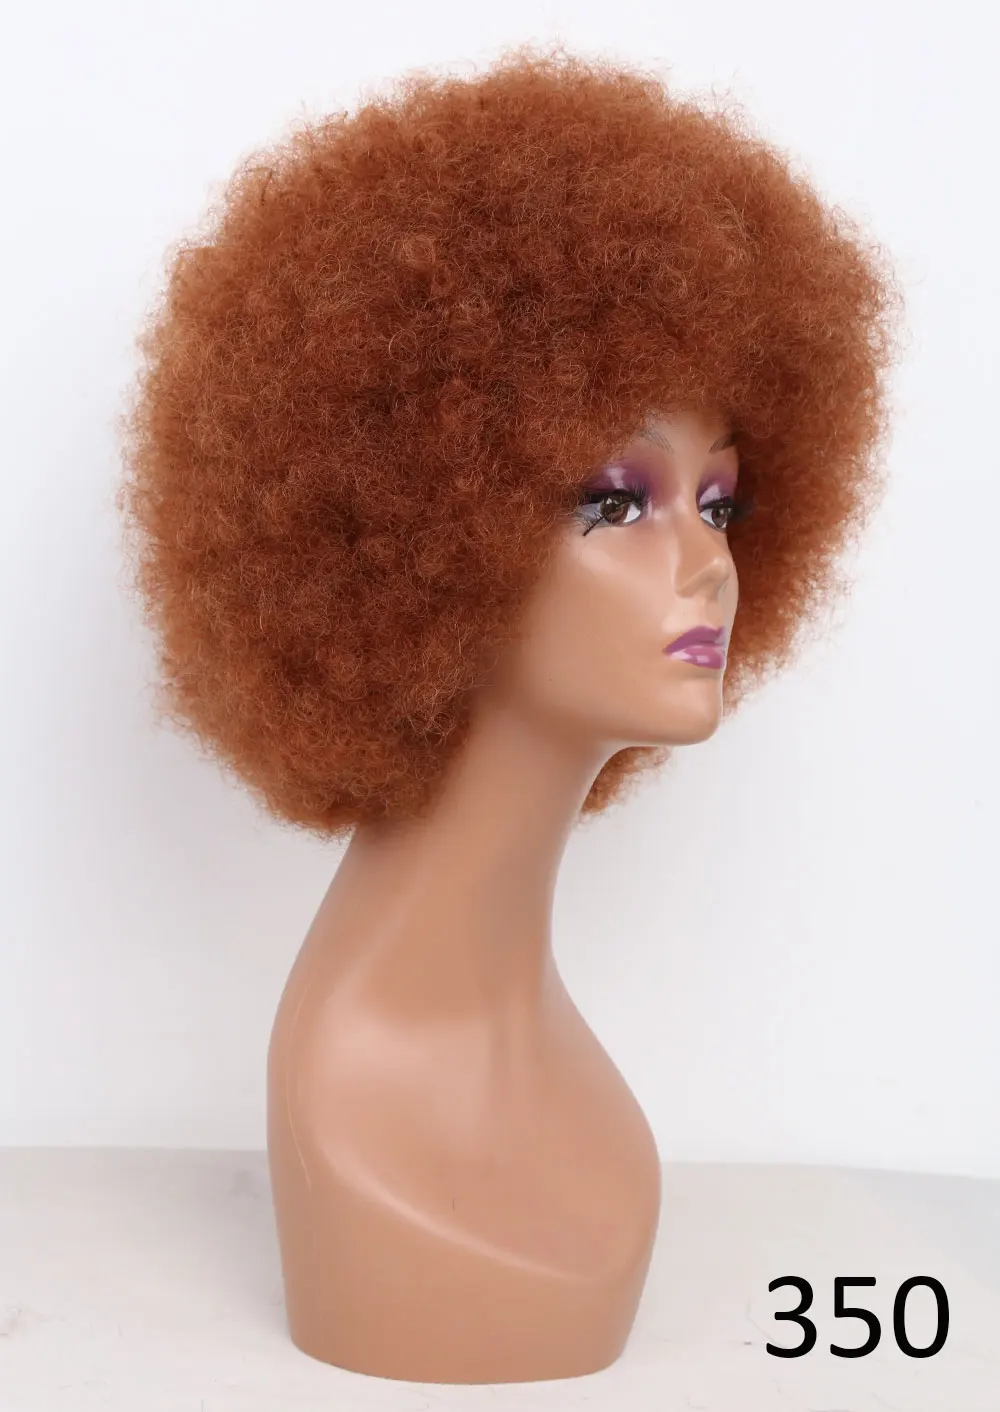 Synthetic Afro Wig Short Fluffy Hair Wigs For Black Women Kinky Curly Hair For Party Dance Cosplay Wigs With Bangs